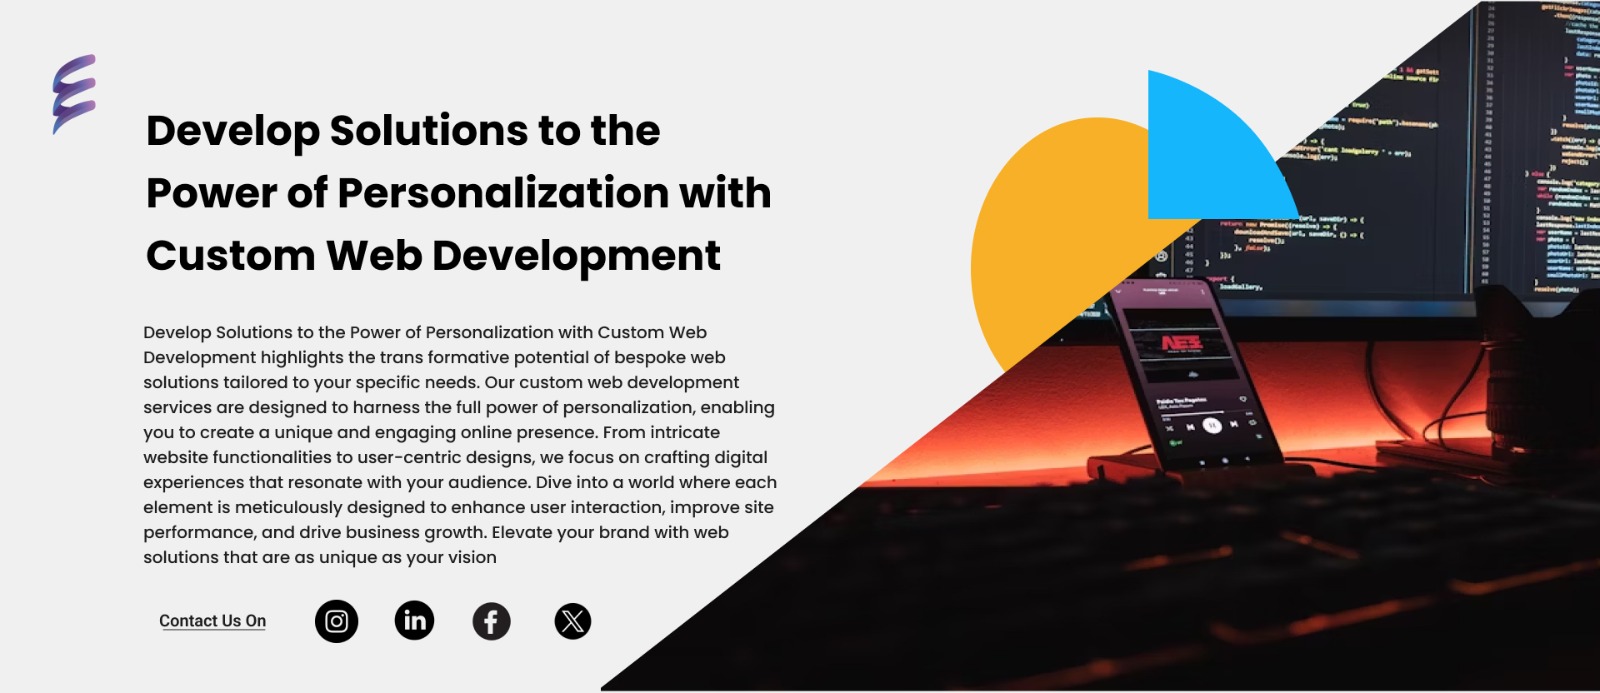 Develop Solutions to the Power of Personalization with Custom Web Development